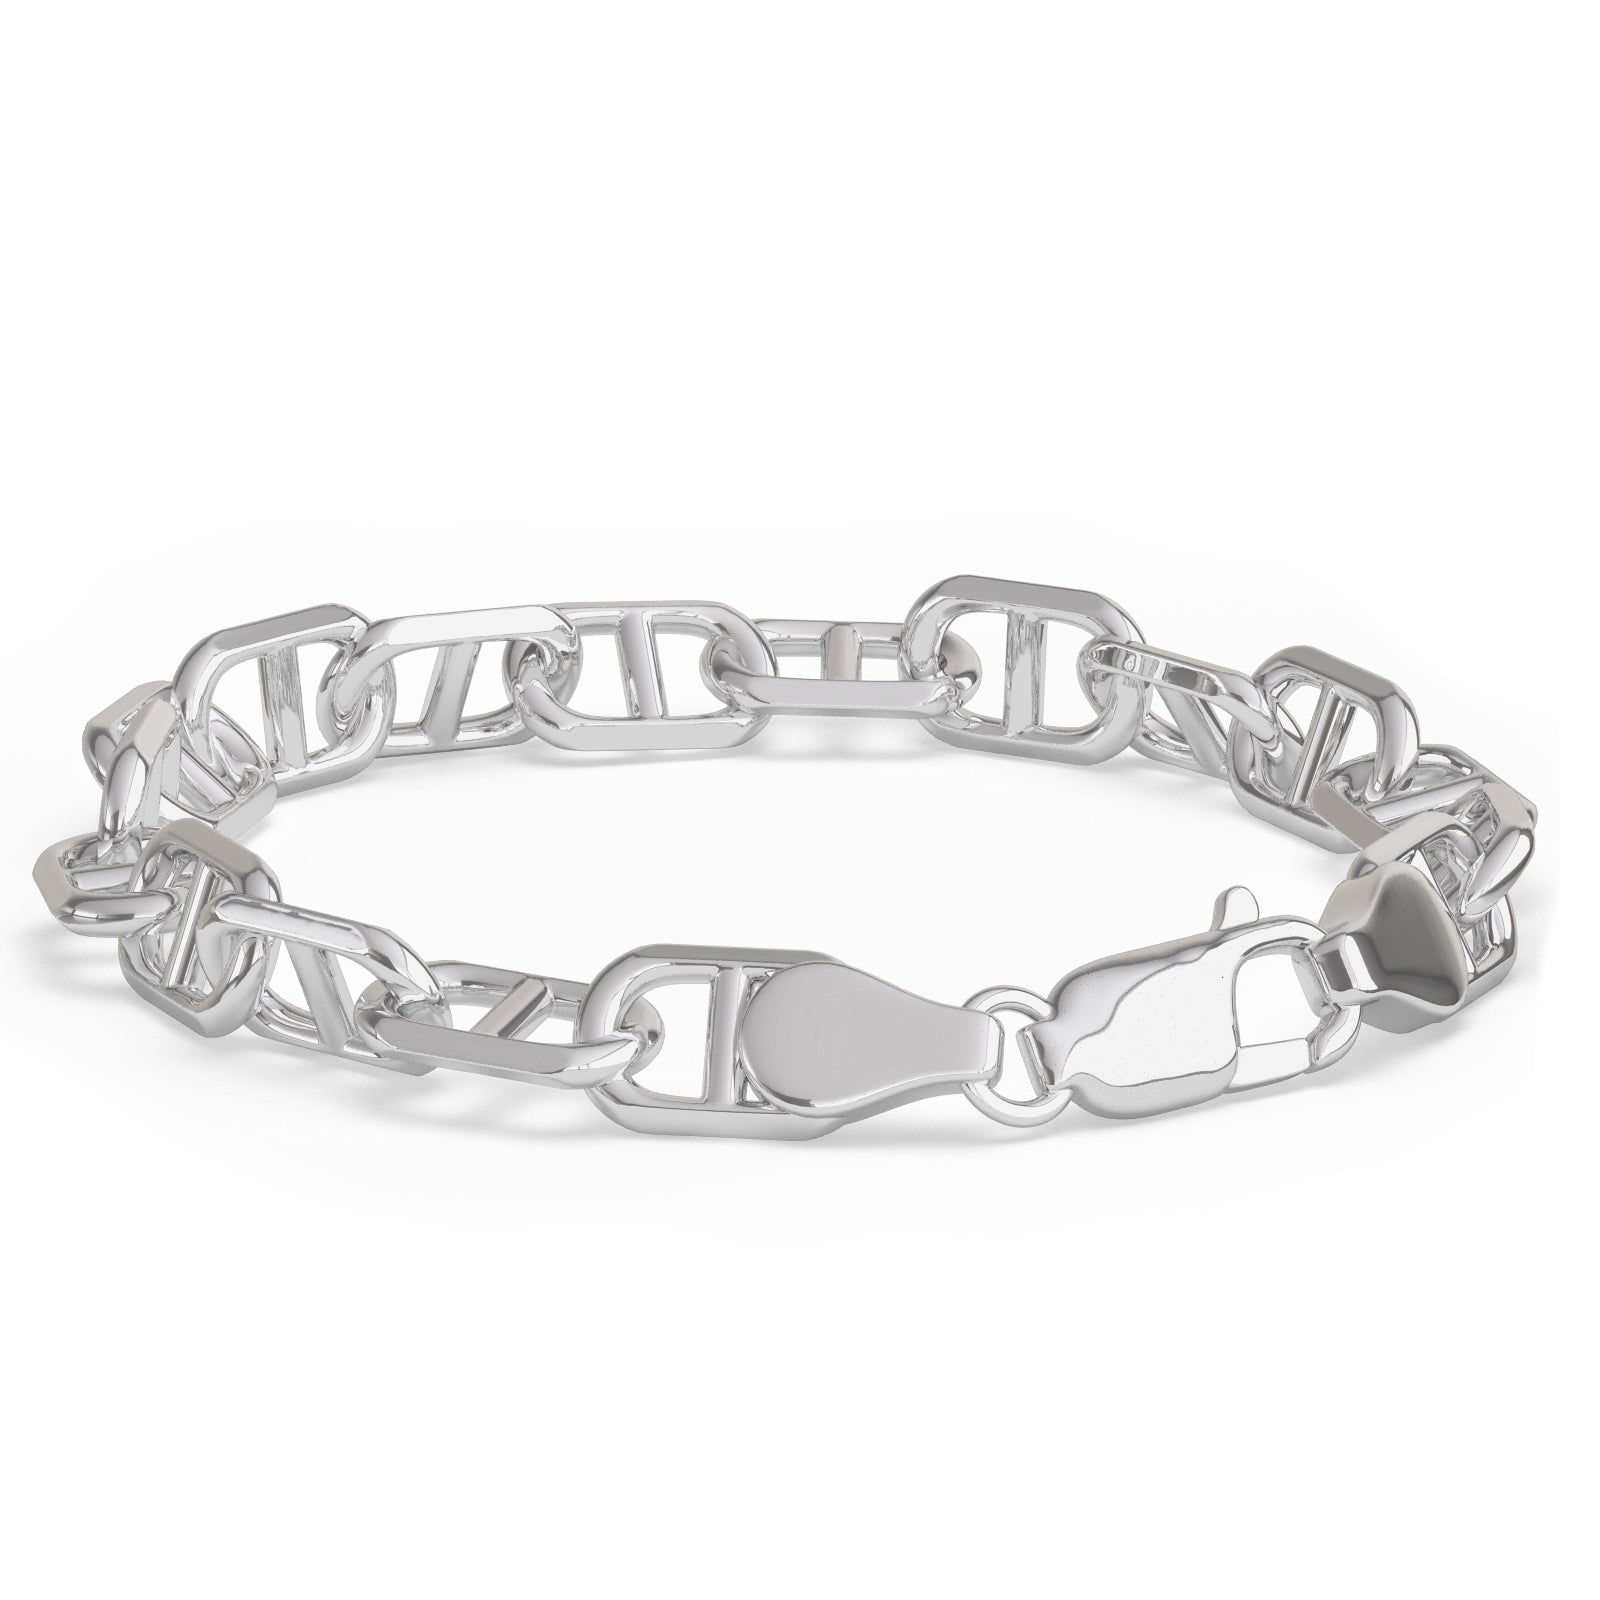 Sterling Silver Mariner Link Bracelet with Lobster Clasp from Nautical Treasure Jewelry In The Florida Keys